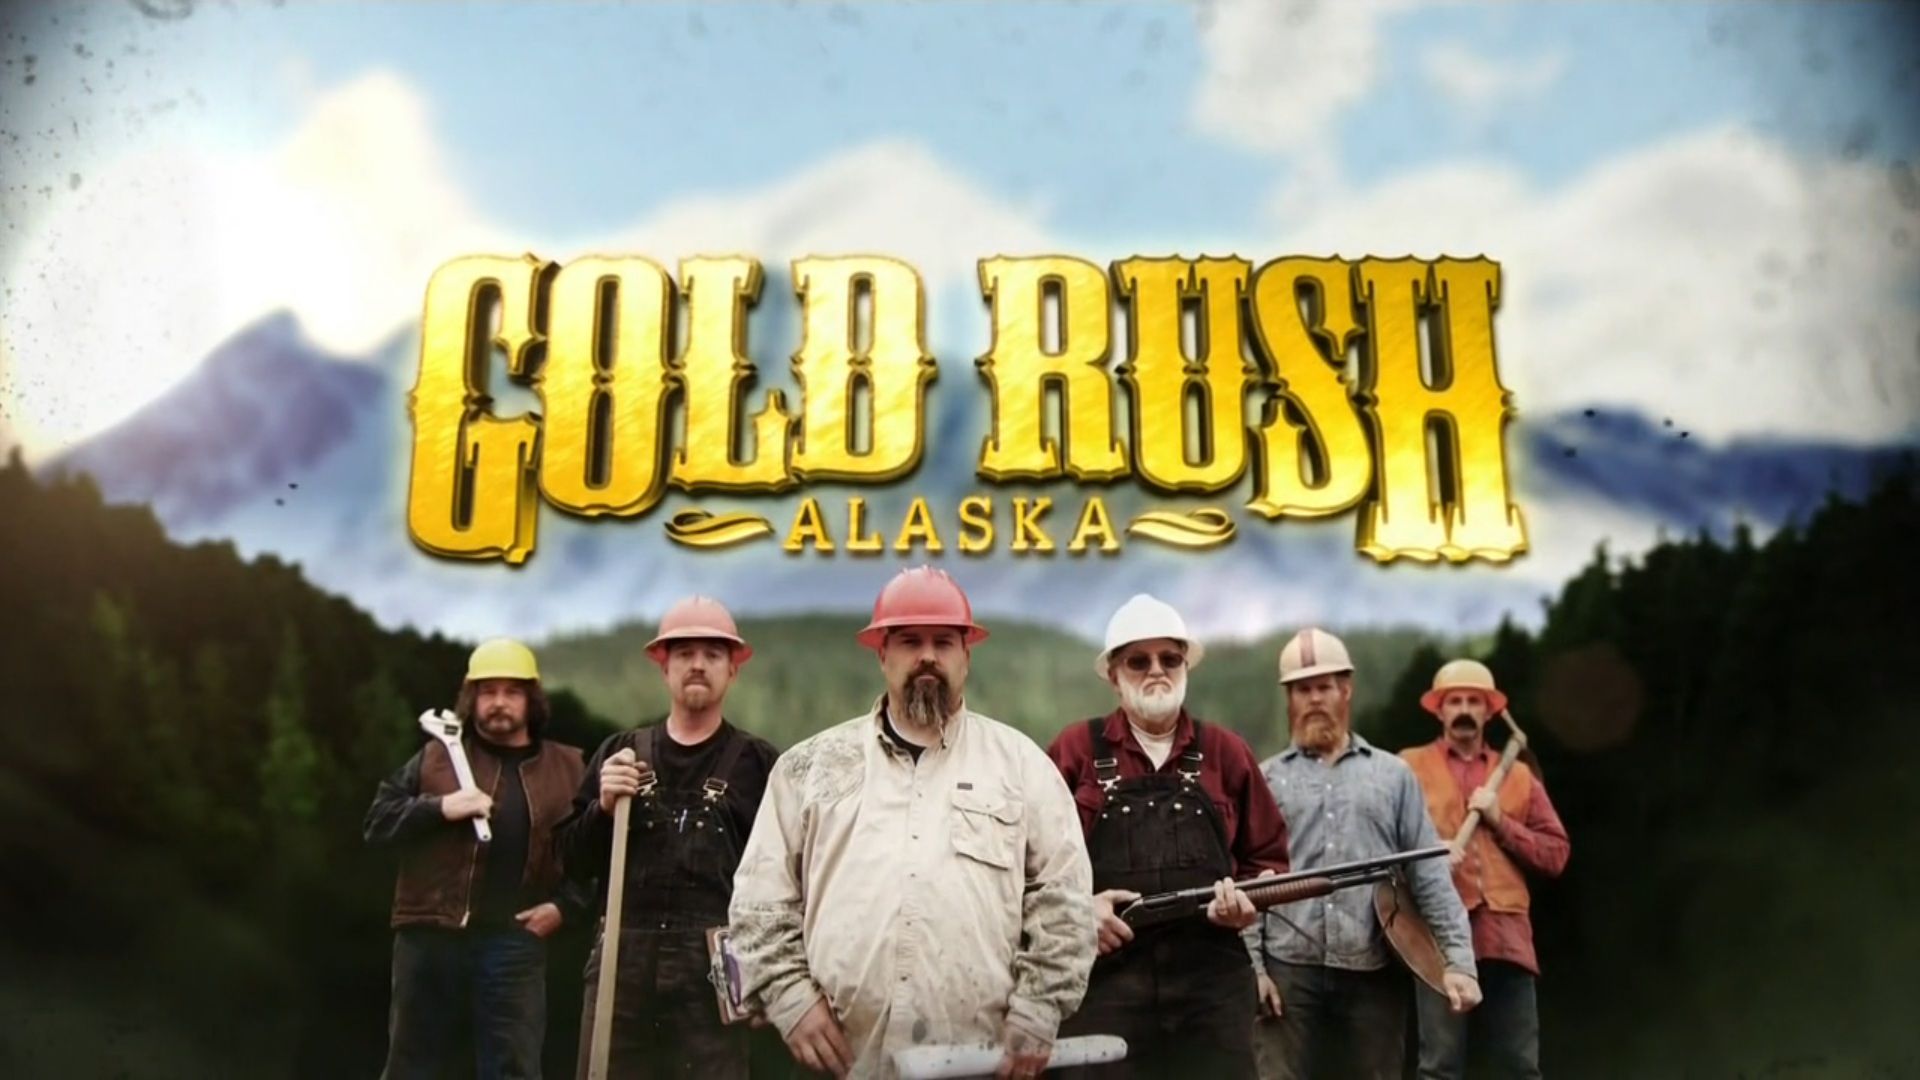 Free download Download Gold Rush Wallpaper Gallery [1920x1080]